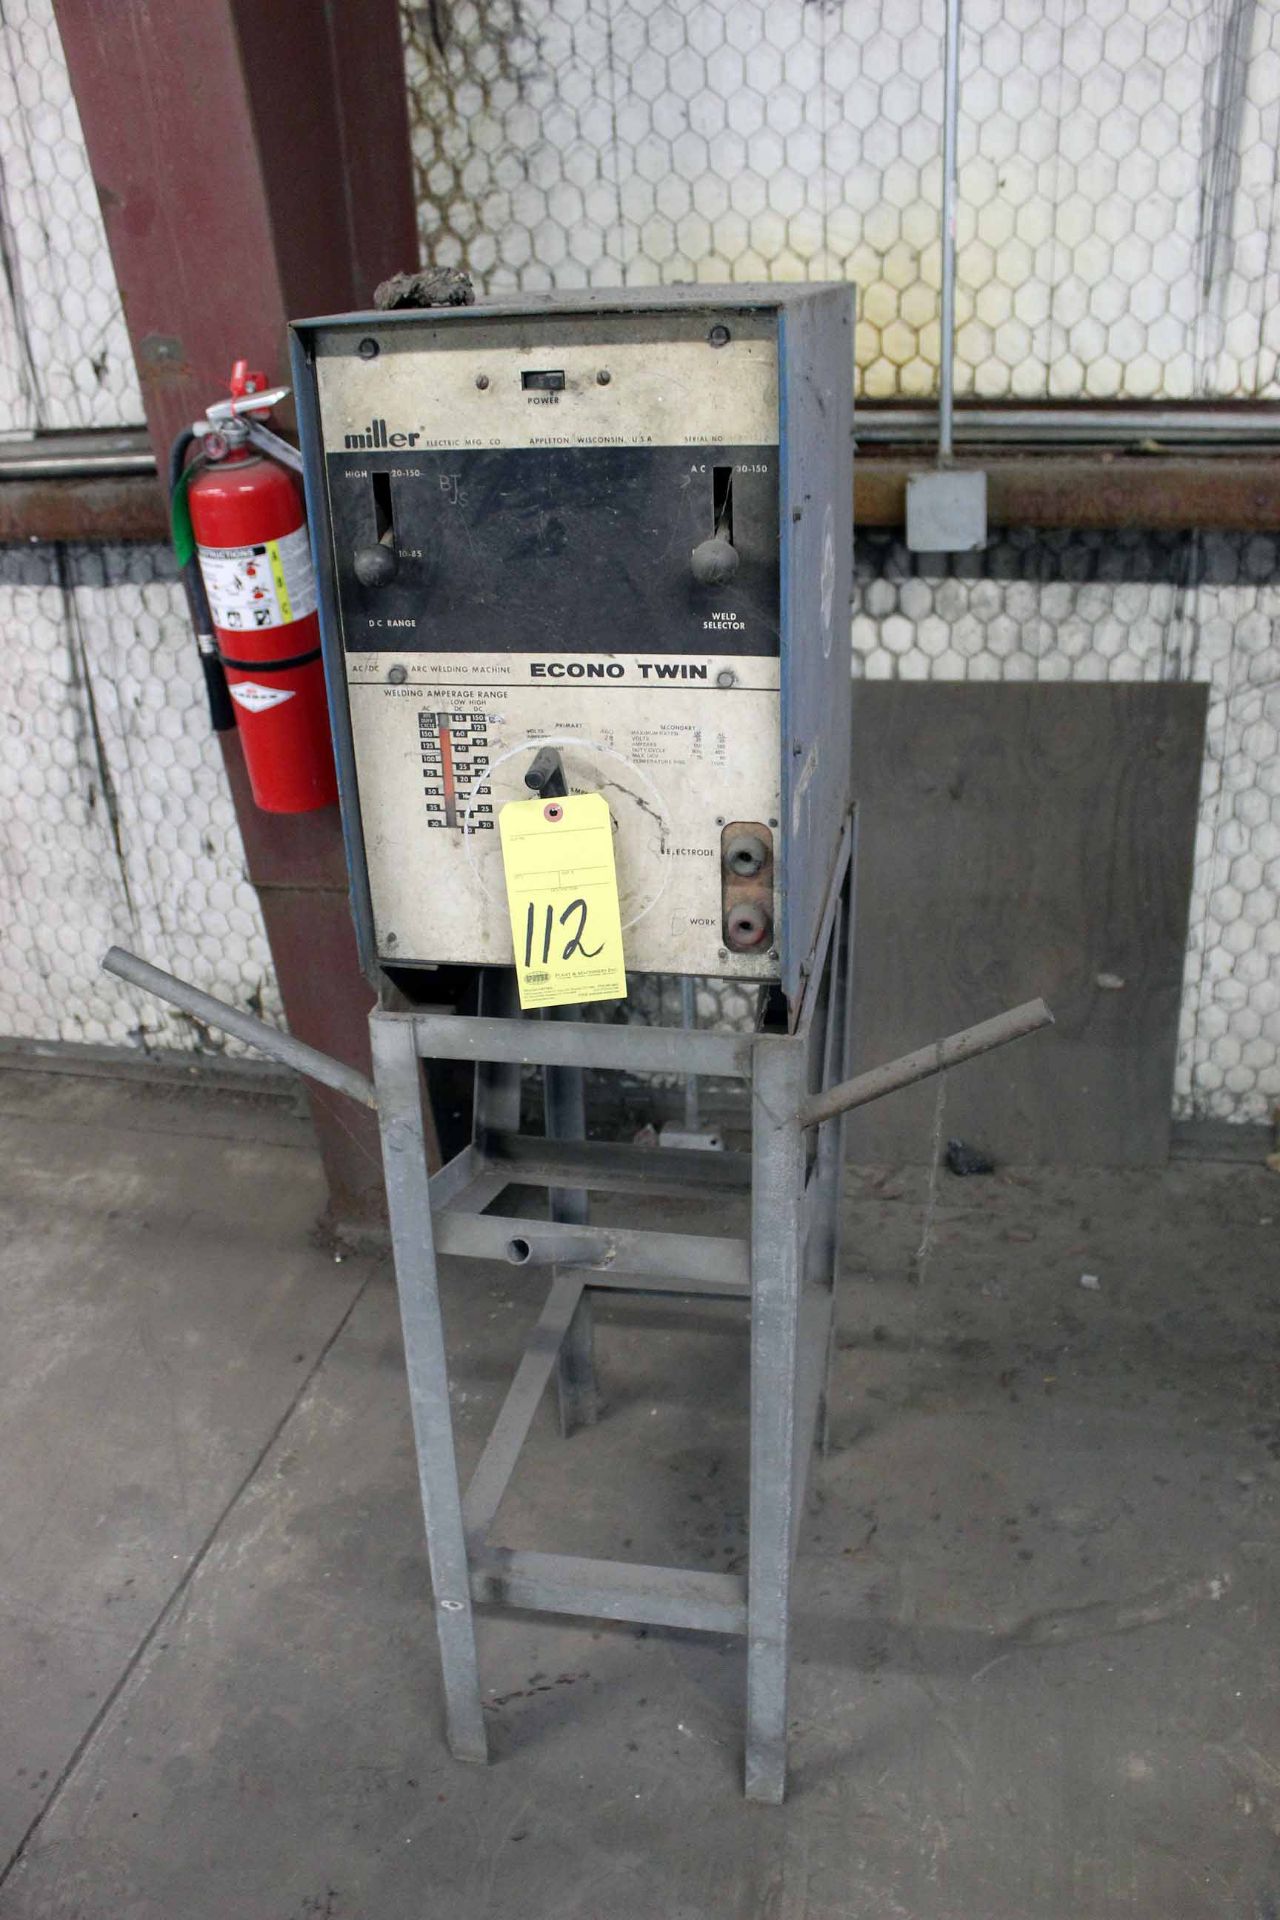 WELDING MACHINE, MILLER MDL. ECONOTWIN AC/DC POWER SOURCE, 20 amps @ 460 v., 100% duty cycle, S/N